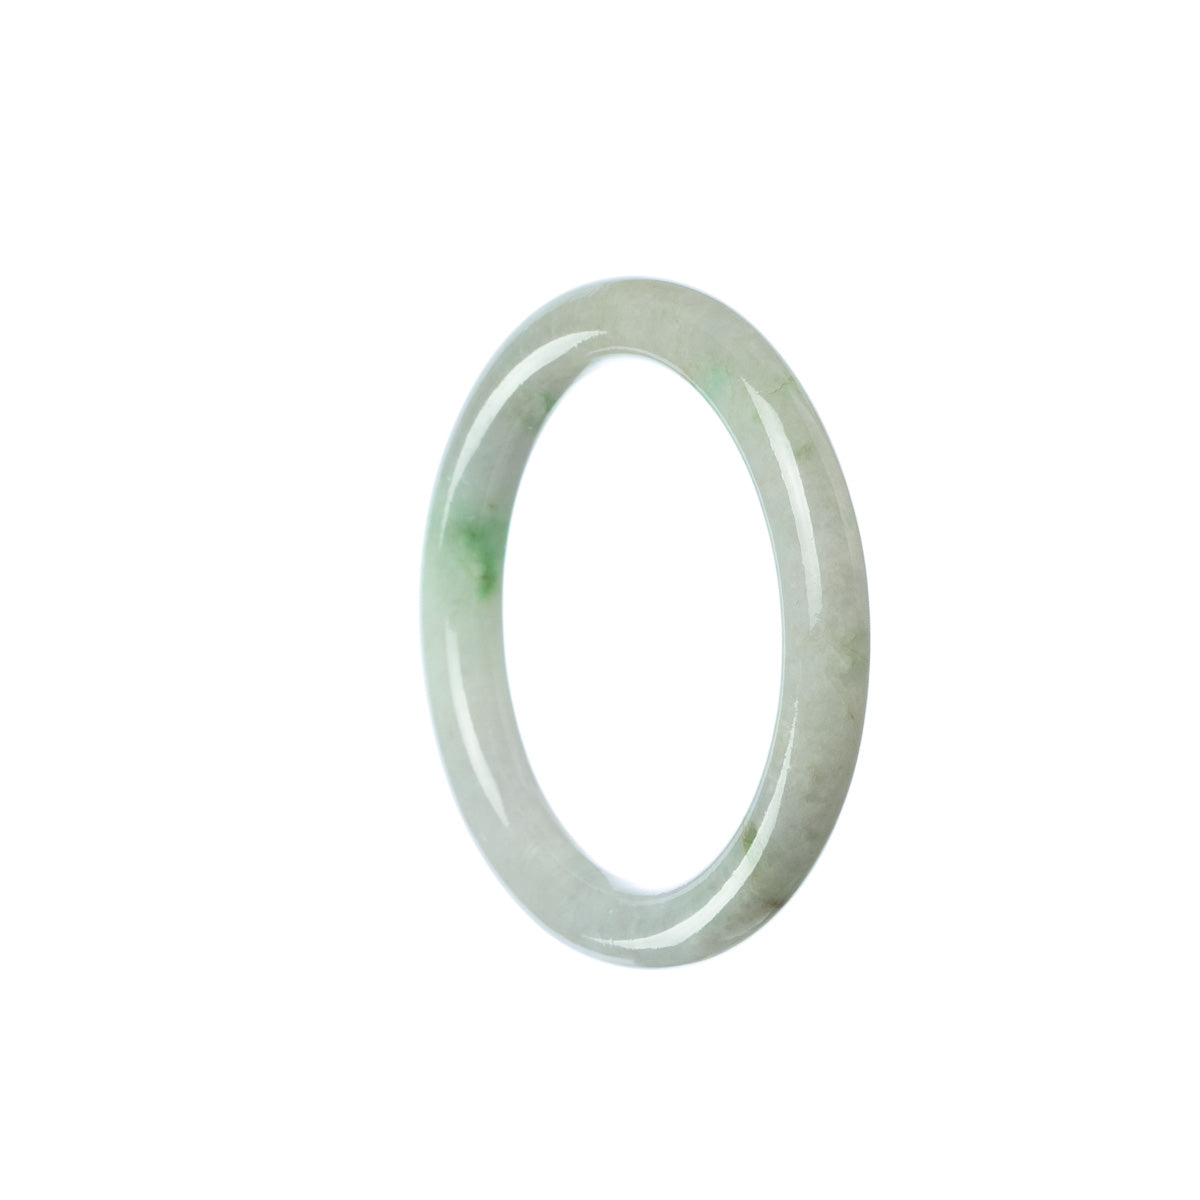 A close-up image of a beautiful green jade bangle with a round shape, designed specifically for children. This high-quality bangle showcases the exquisite craftsmanship and natural beauty of genuine grade A green jade. Perfect for adding a touch of elegance to any outfit.